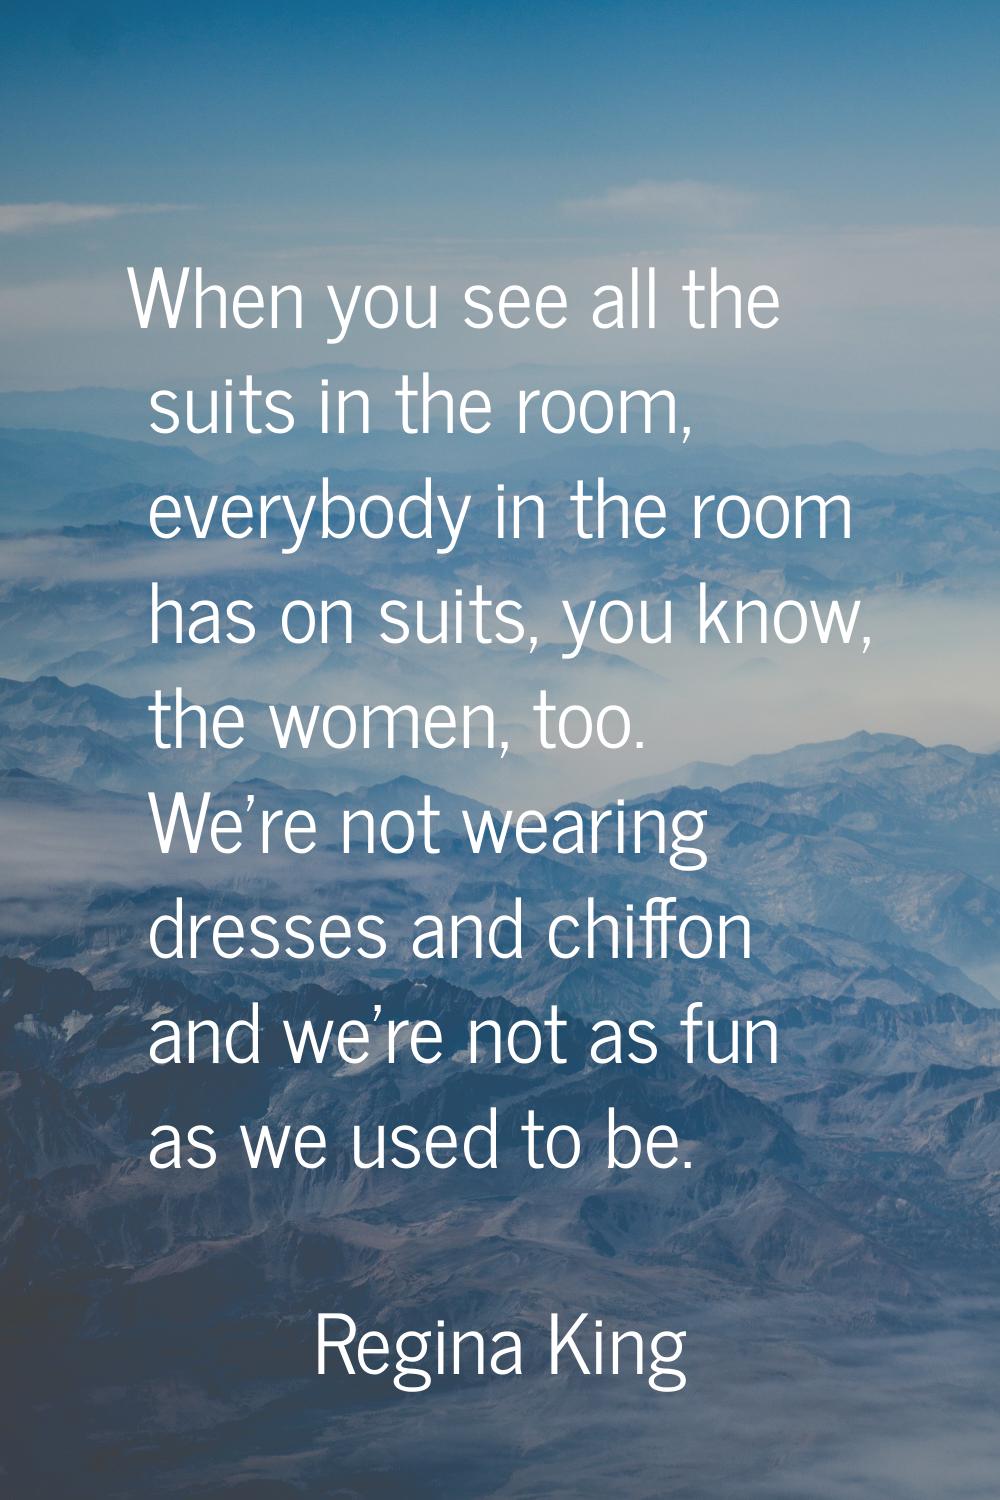 When you see all the suits in the room, everybody in the room has on suits, you know, the women, to